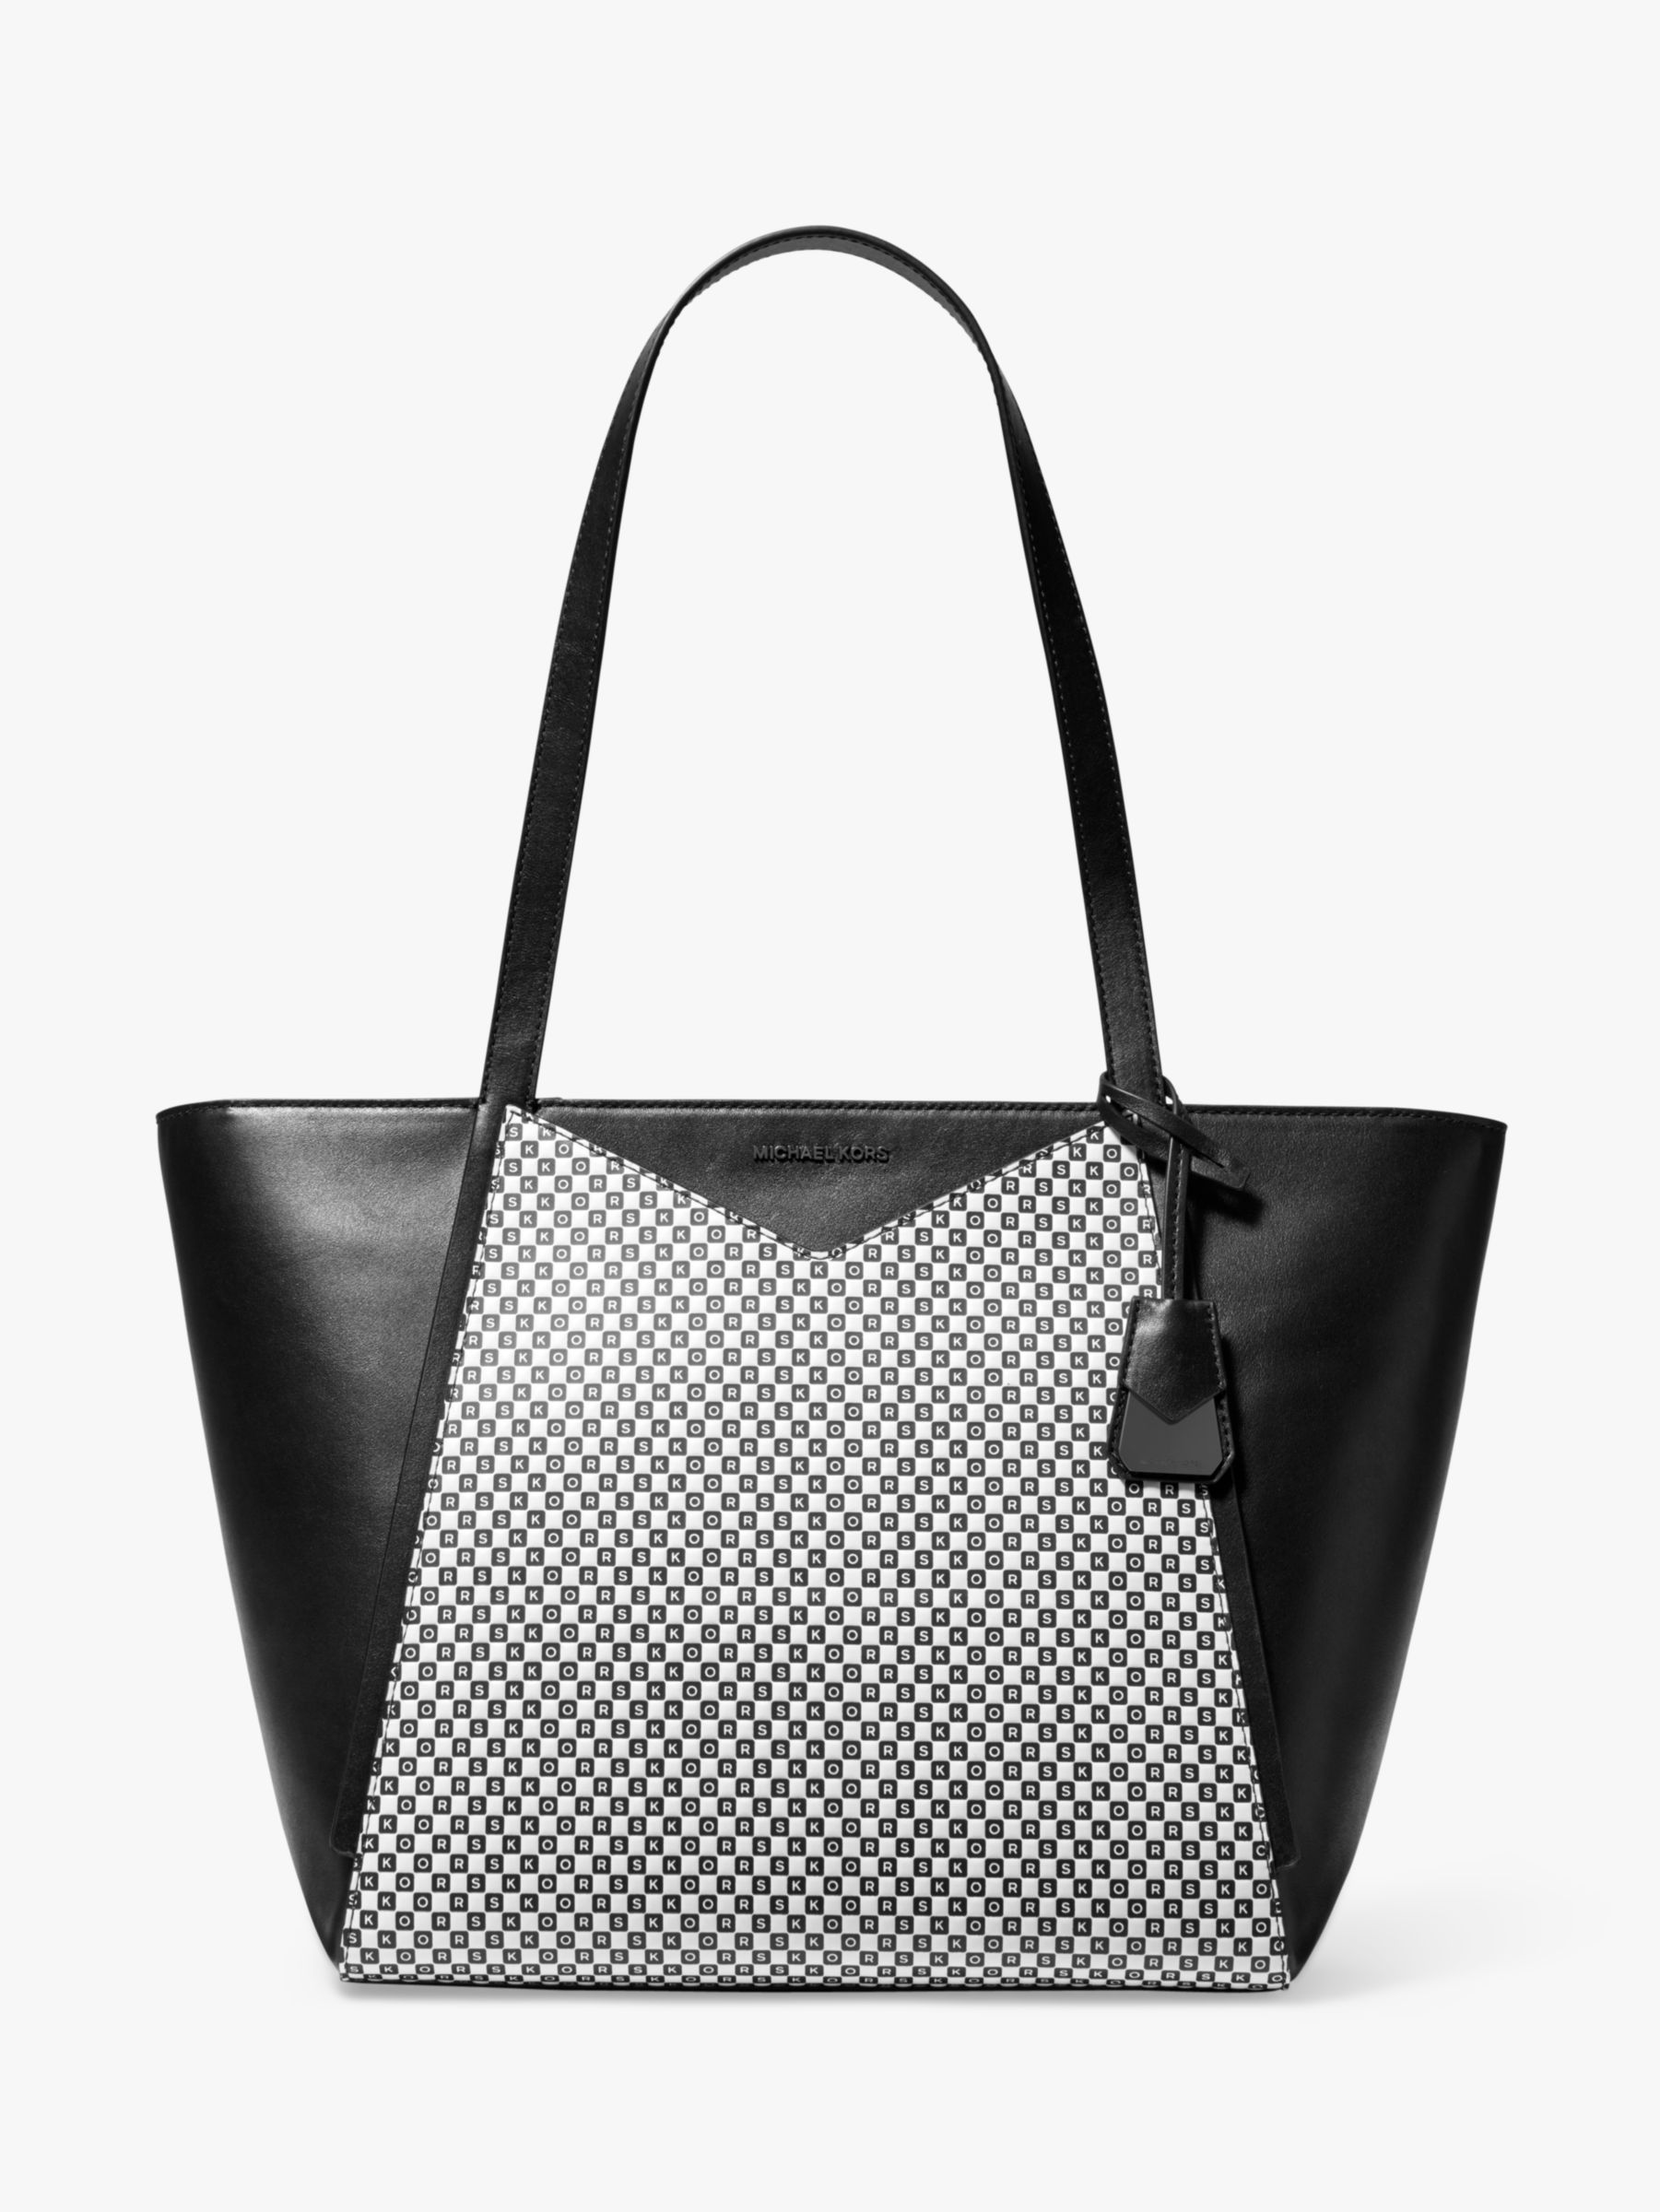 michael kors whitney leather tote